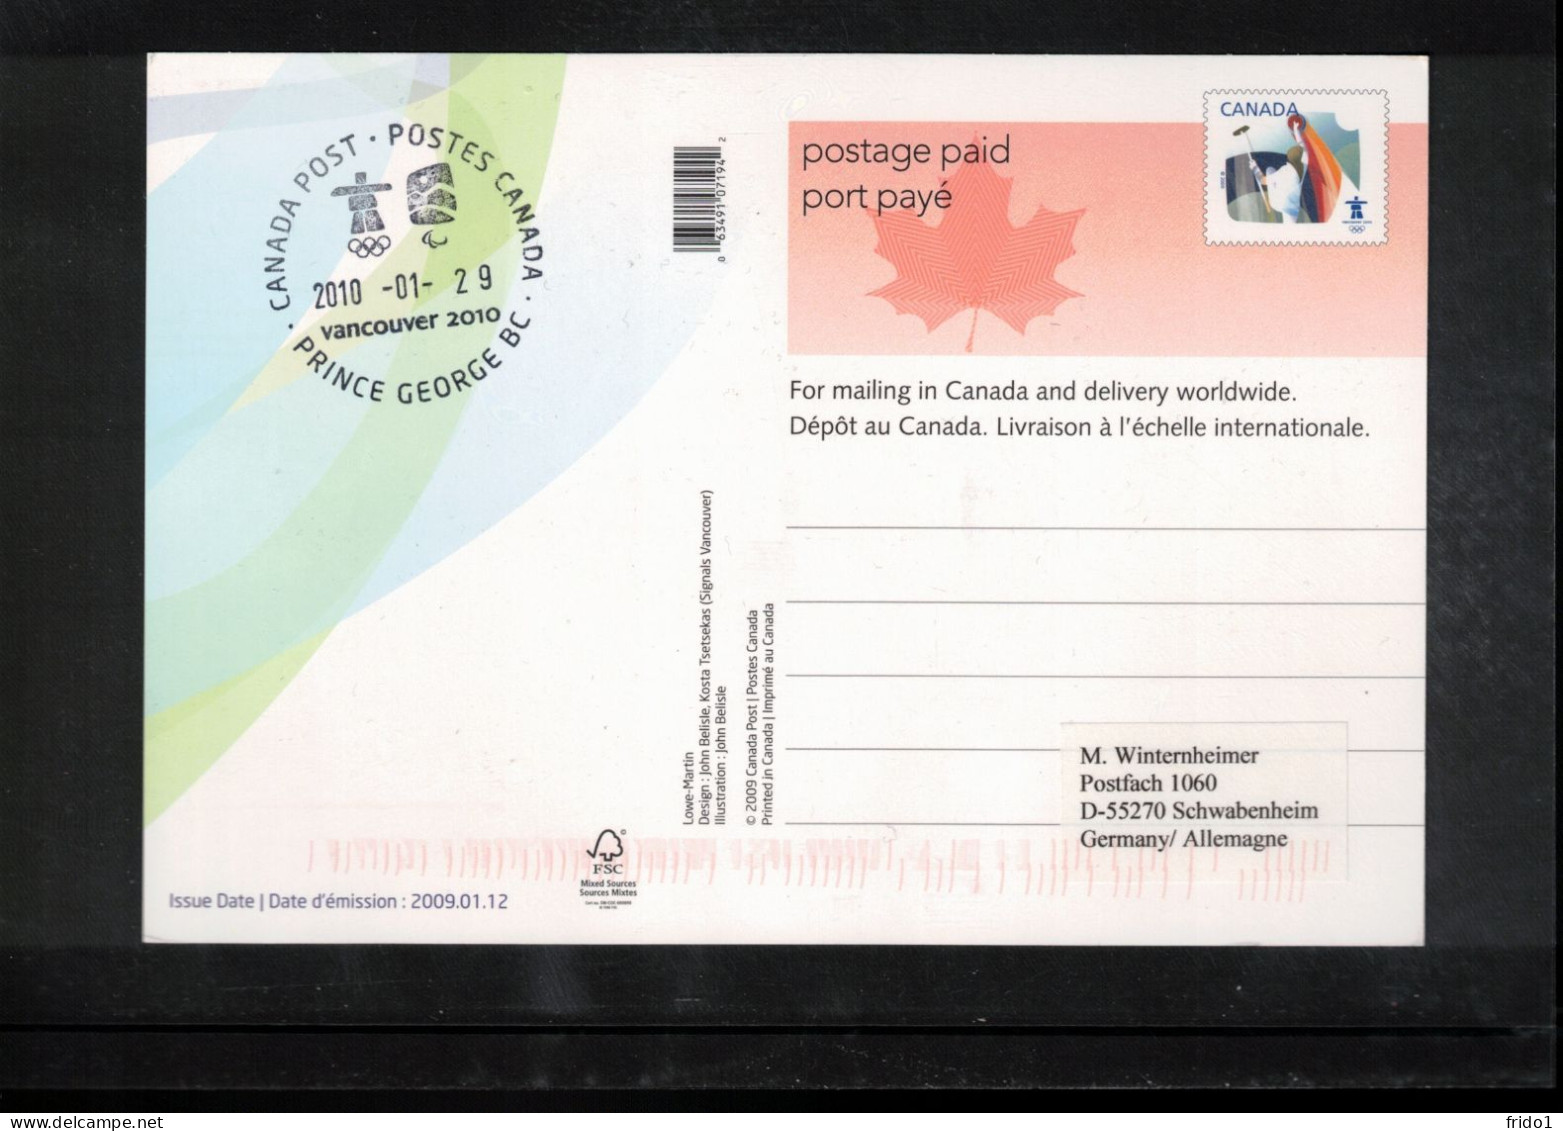 Canada 2010 Olympic Games Vancouver - PRINCE GEORGE BC Postmark Interesting Postcard - Hiver 2010: Vancouver